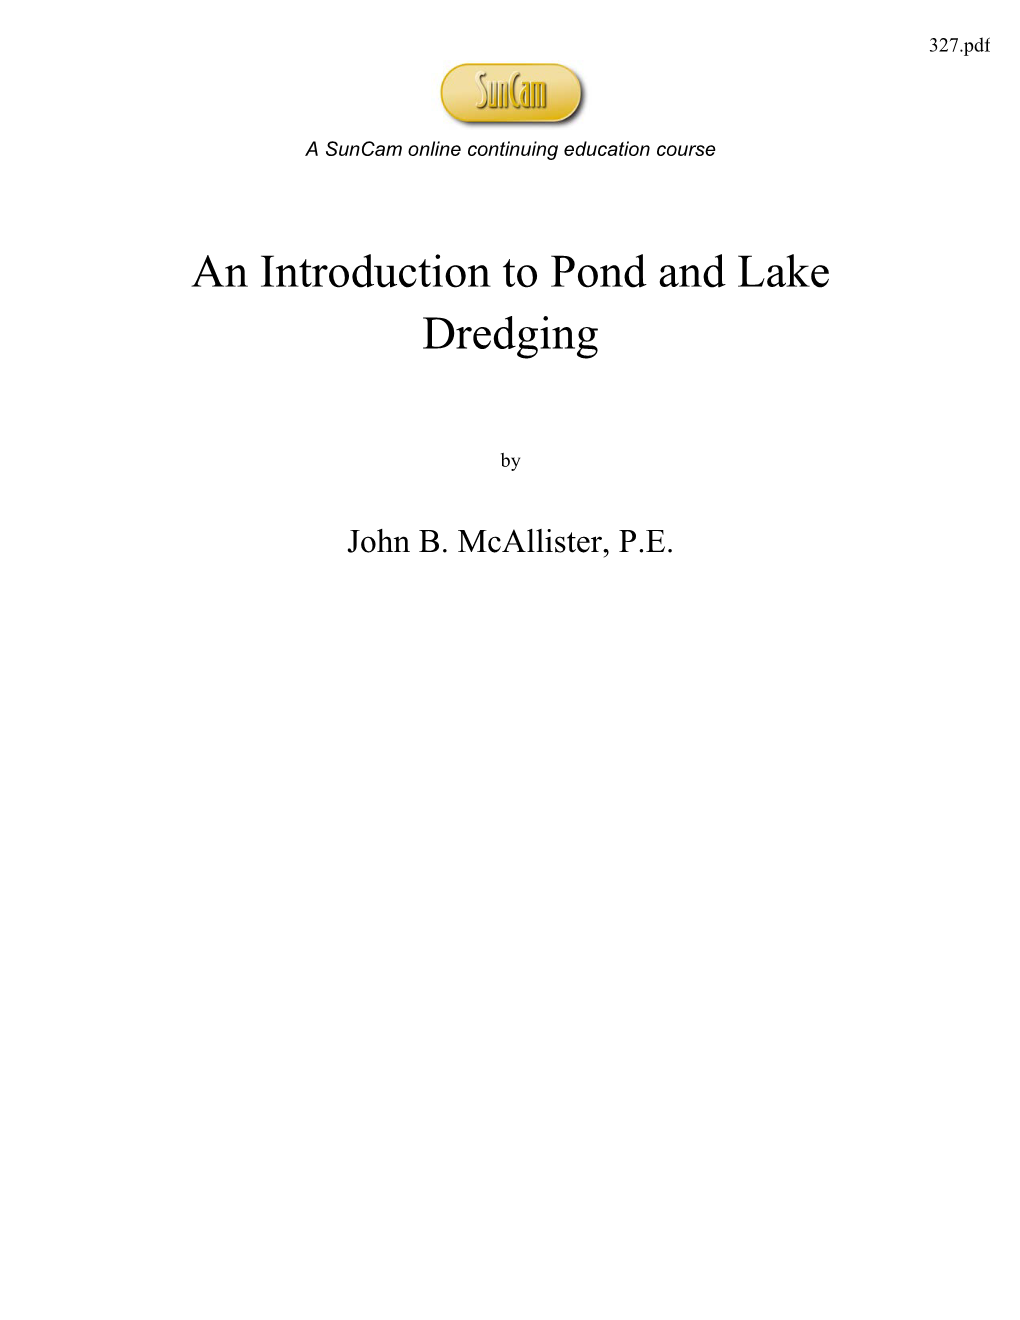 An Introduction to Pond and Lake Dredging